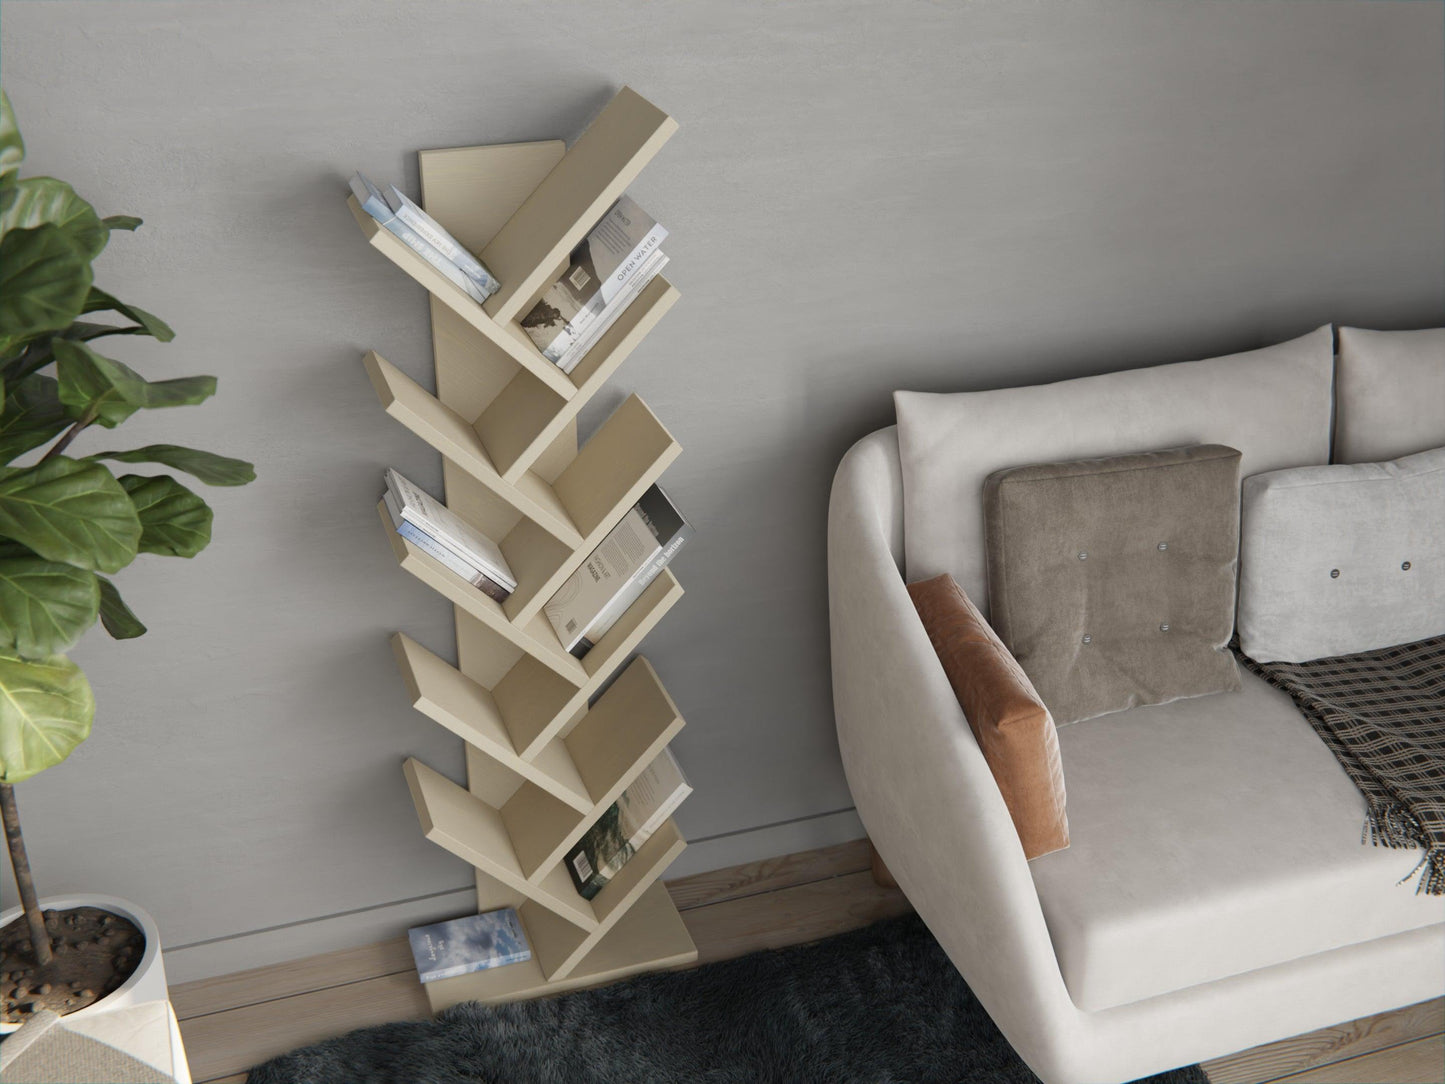 Experience the ease of our ply bookshelf. Ideal for children's rooms, offering stylish organisation and space-saving.